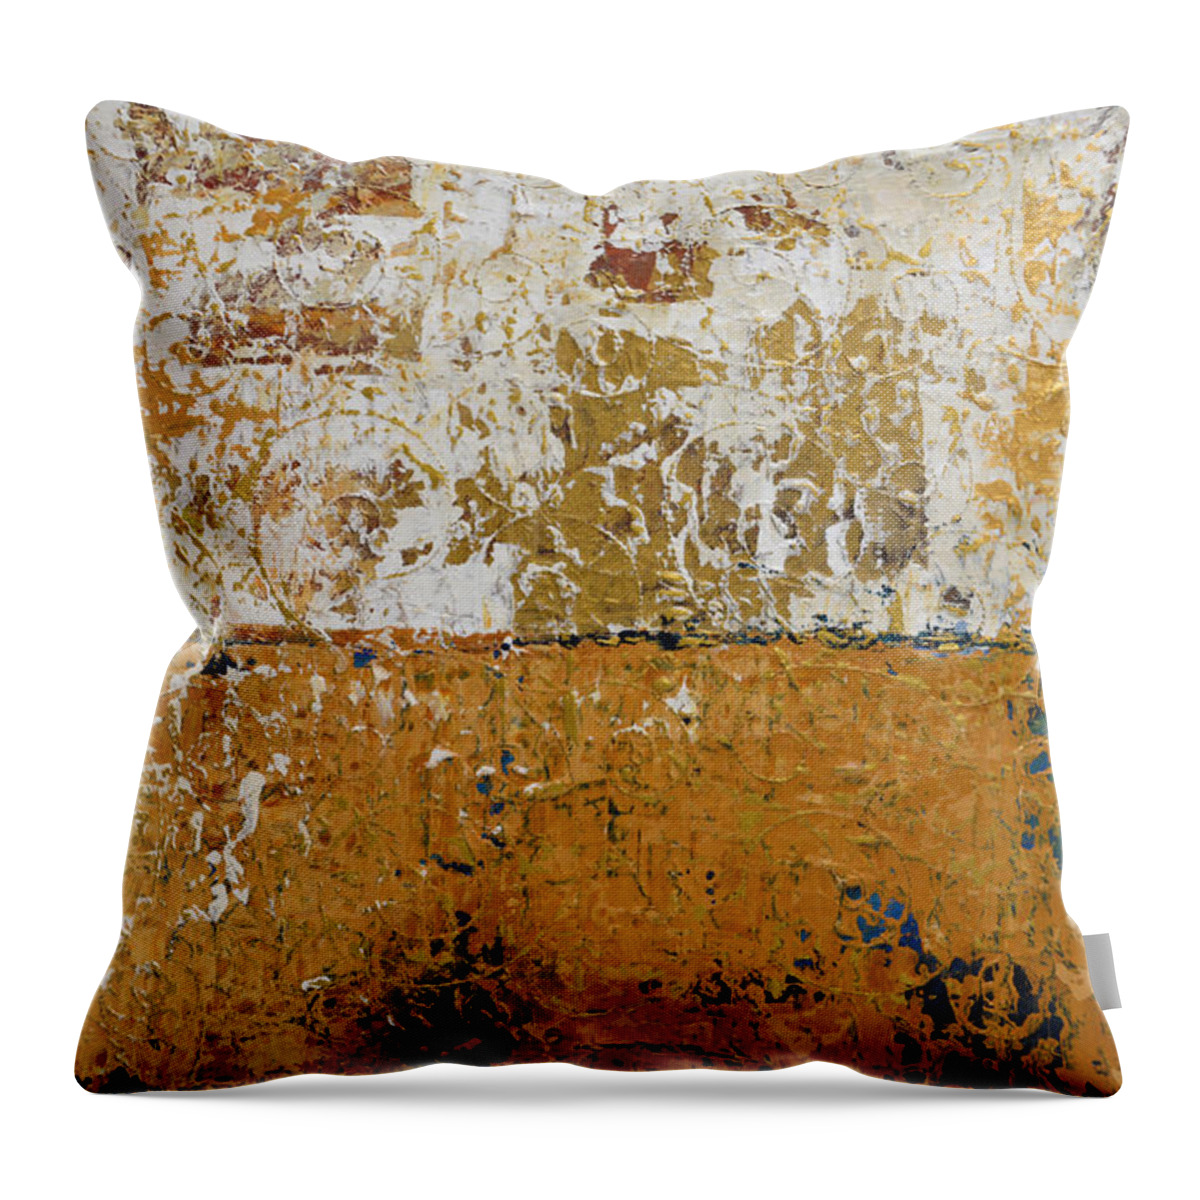 Landscape Throw Pillow featuring the painting Architectural Elements by Linda Bailey